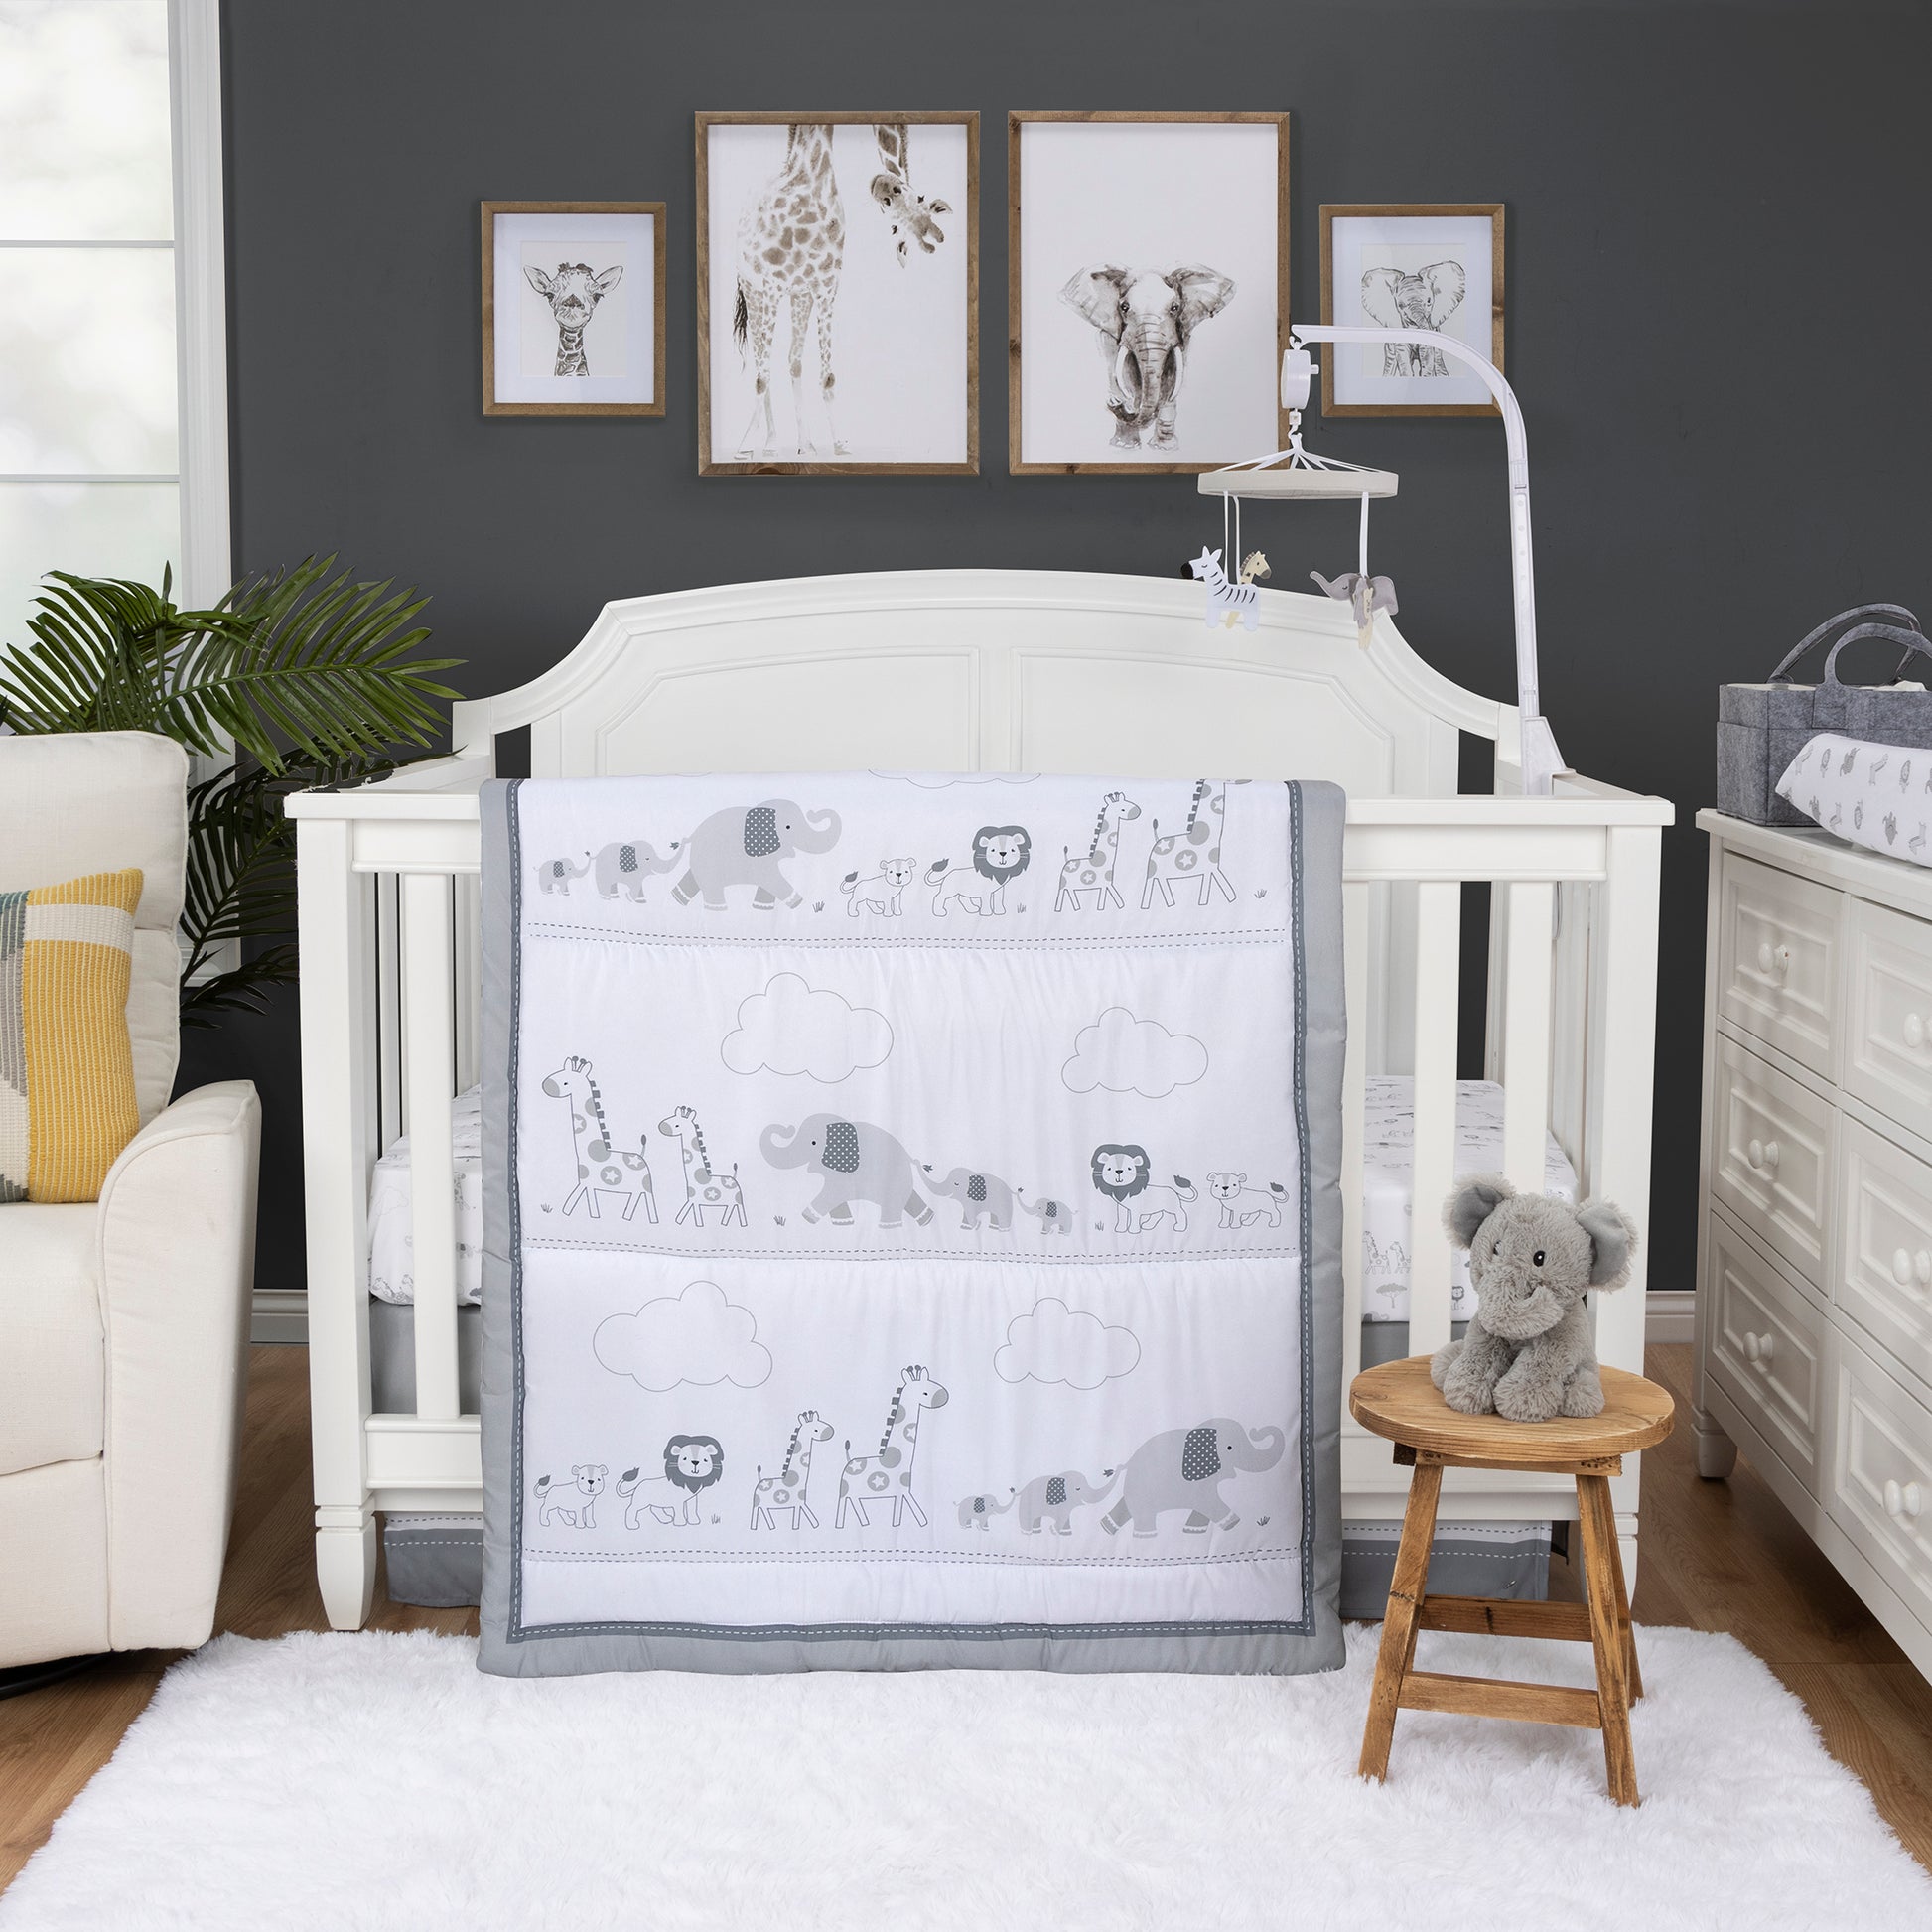 Follow the Leader 4 Piece Crib Bedding Set by Sammy & Lou. This collection features gray baby and grown lions, giraffes and elephants following each other through the dessert. A dashed bedtime gray inner border and a glacier gray outer border frames this set to match any nursery